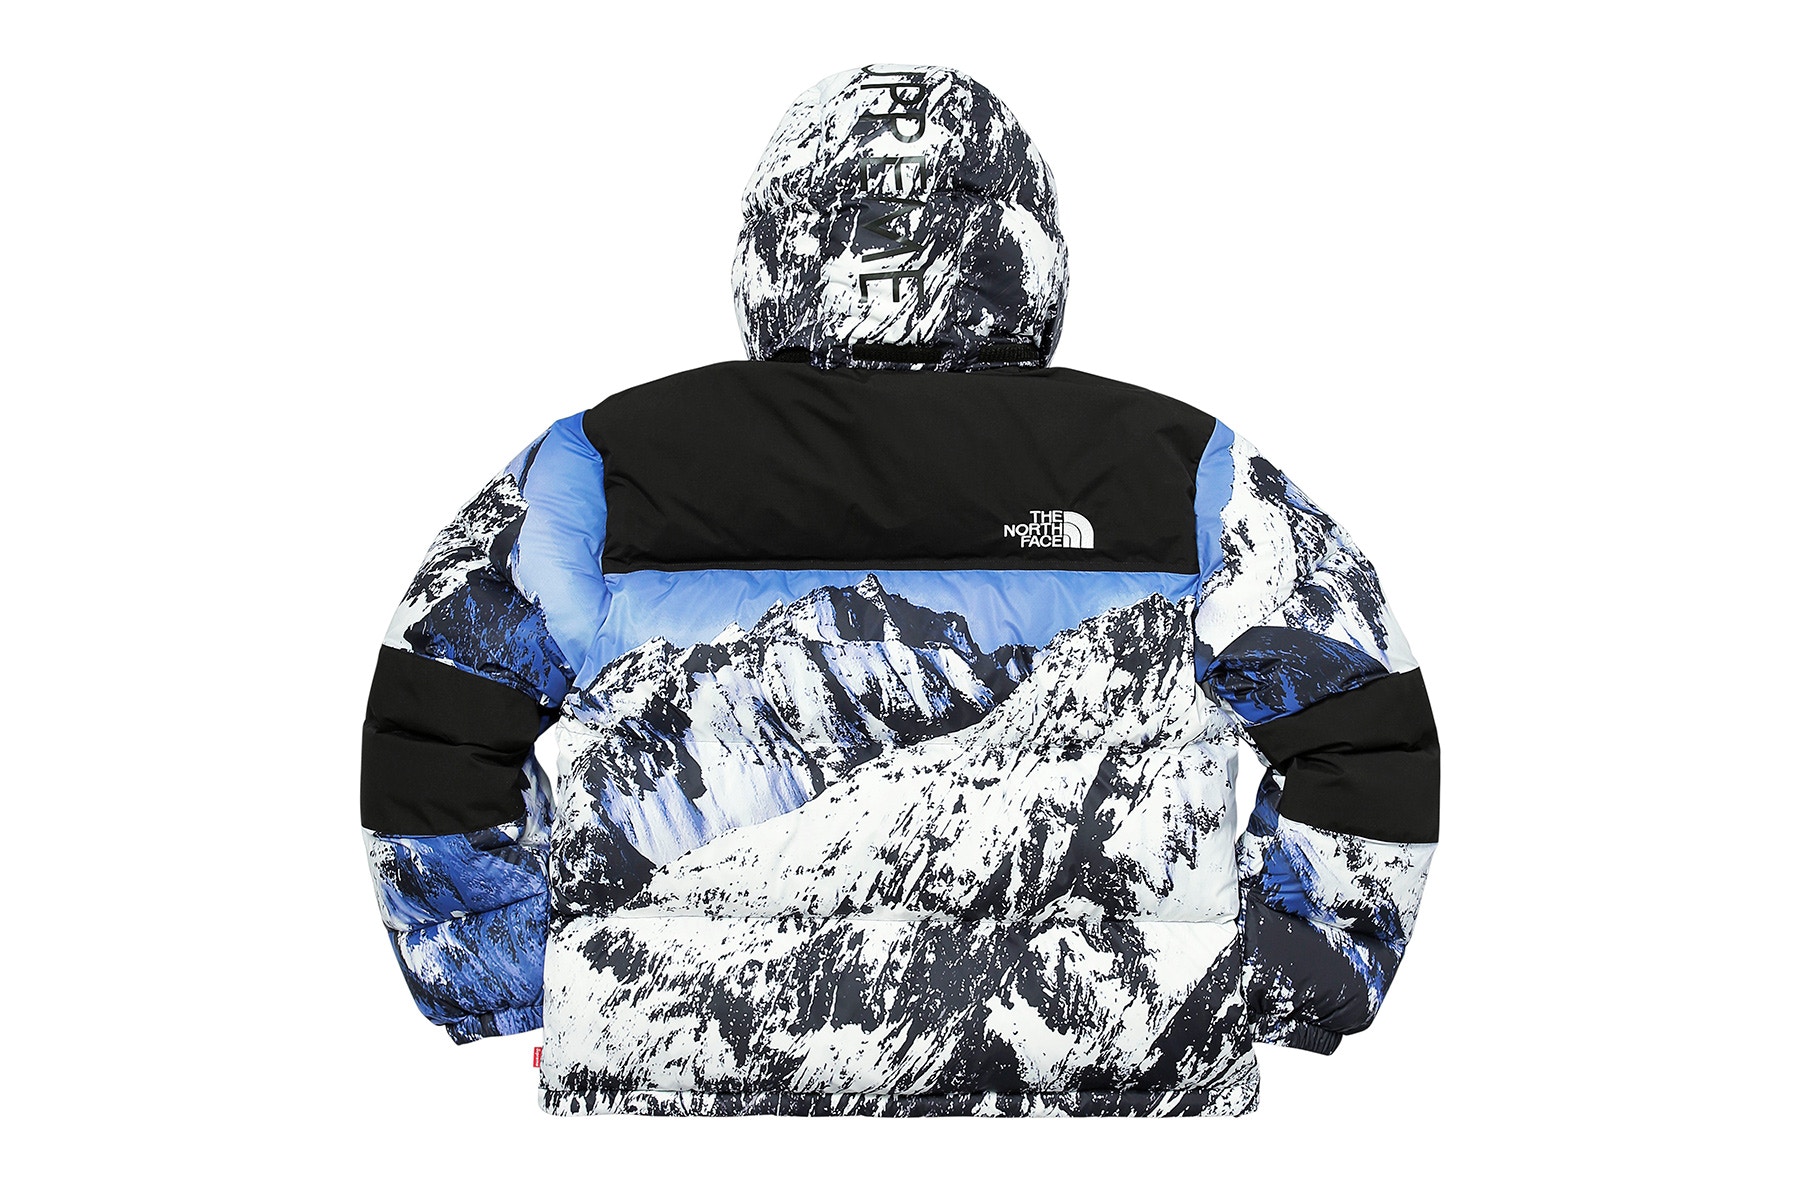 Supreme x The North Face Fall/Winter 2017 Collection – Online | Men's Fashion, Street Style, Fashion News & Streetwear